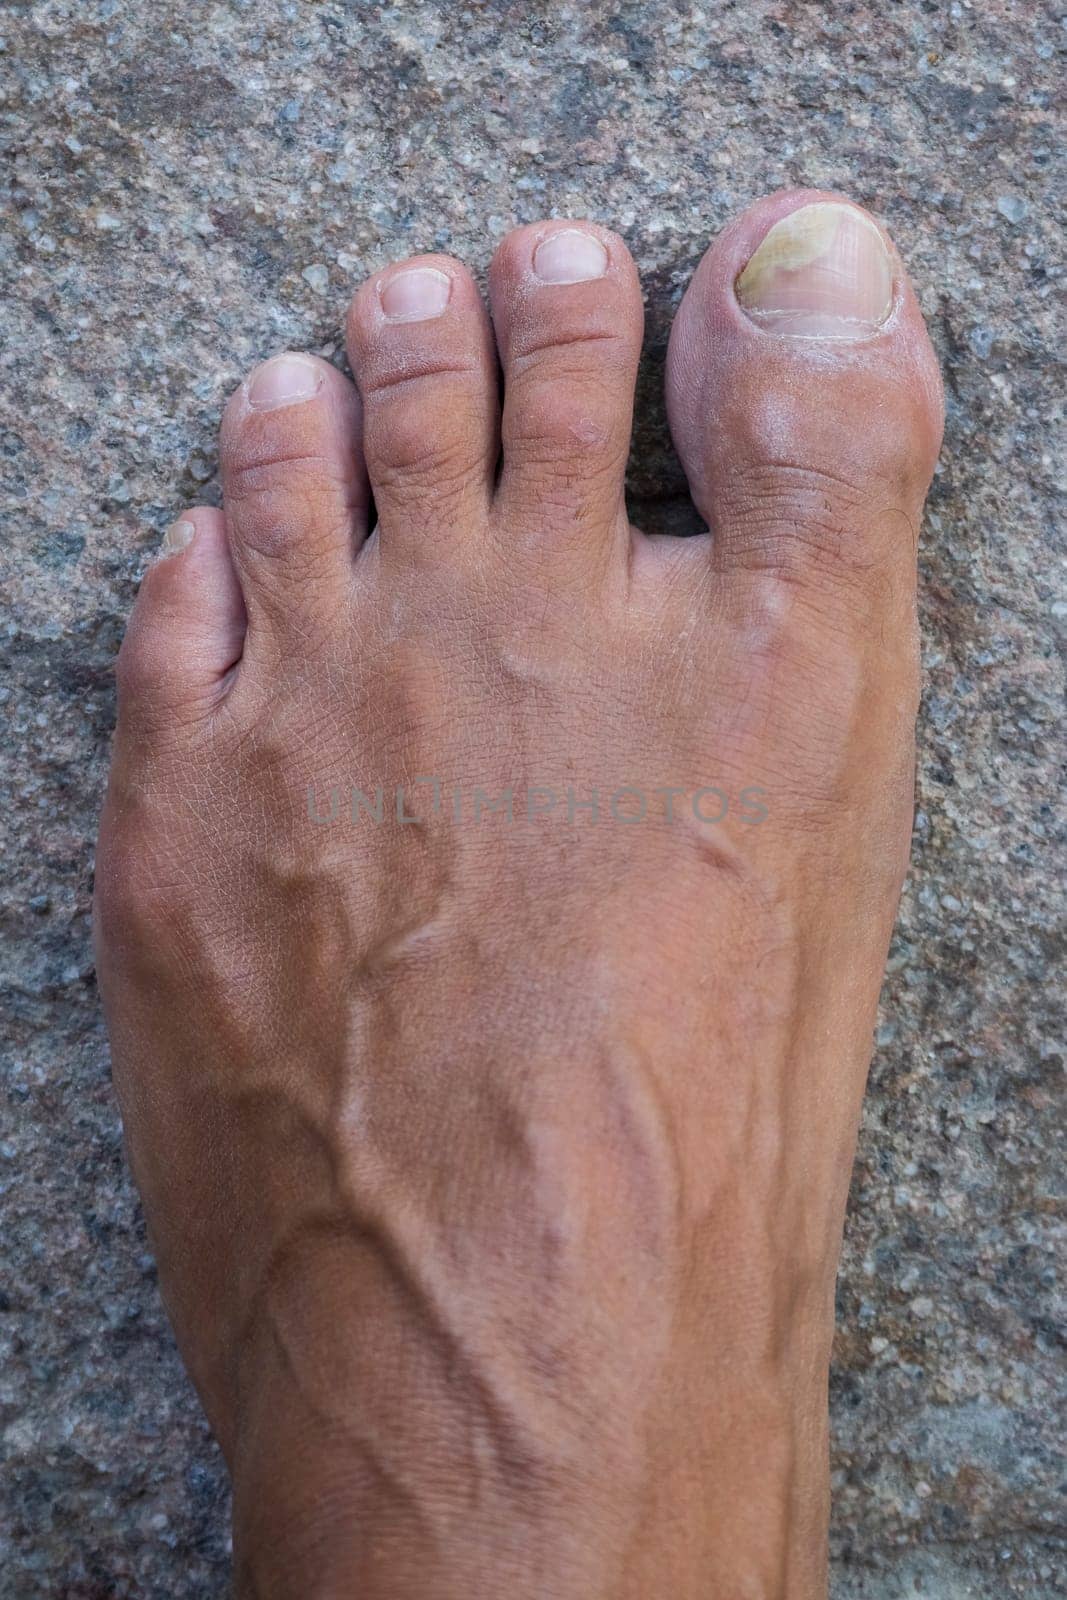 Toenails with fungus problems on stone background close up by Robertobinetti70